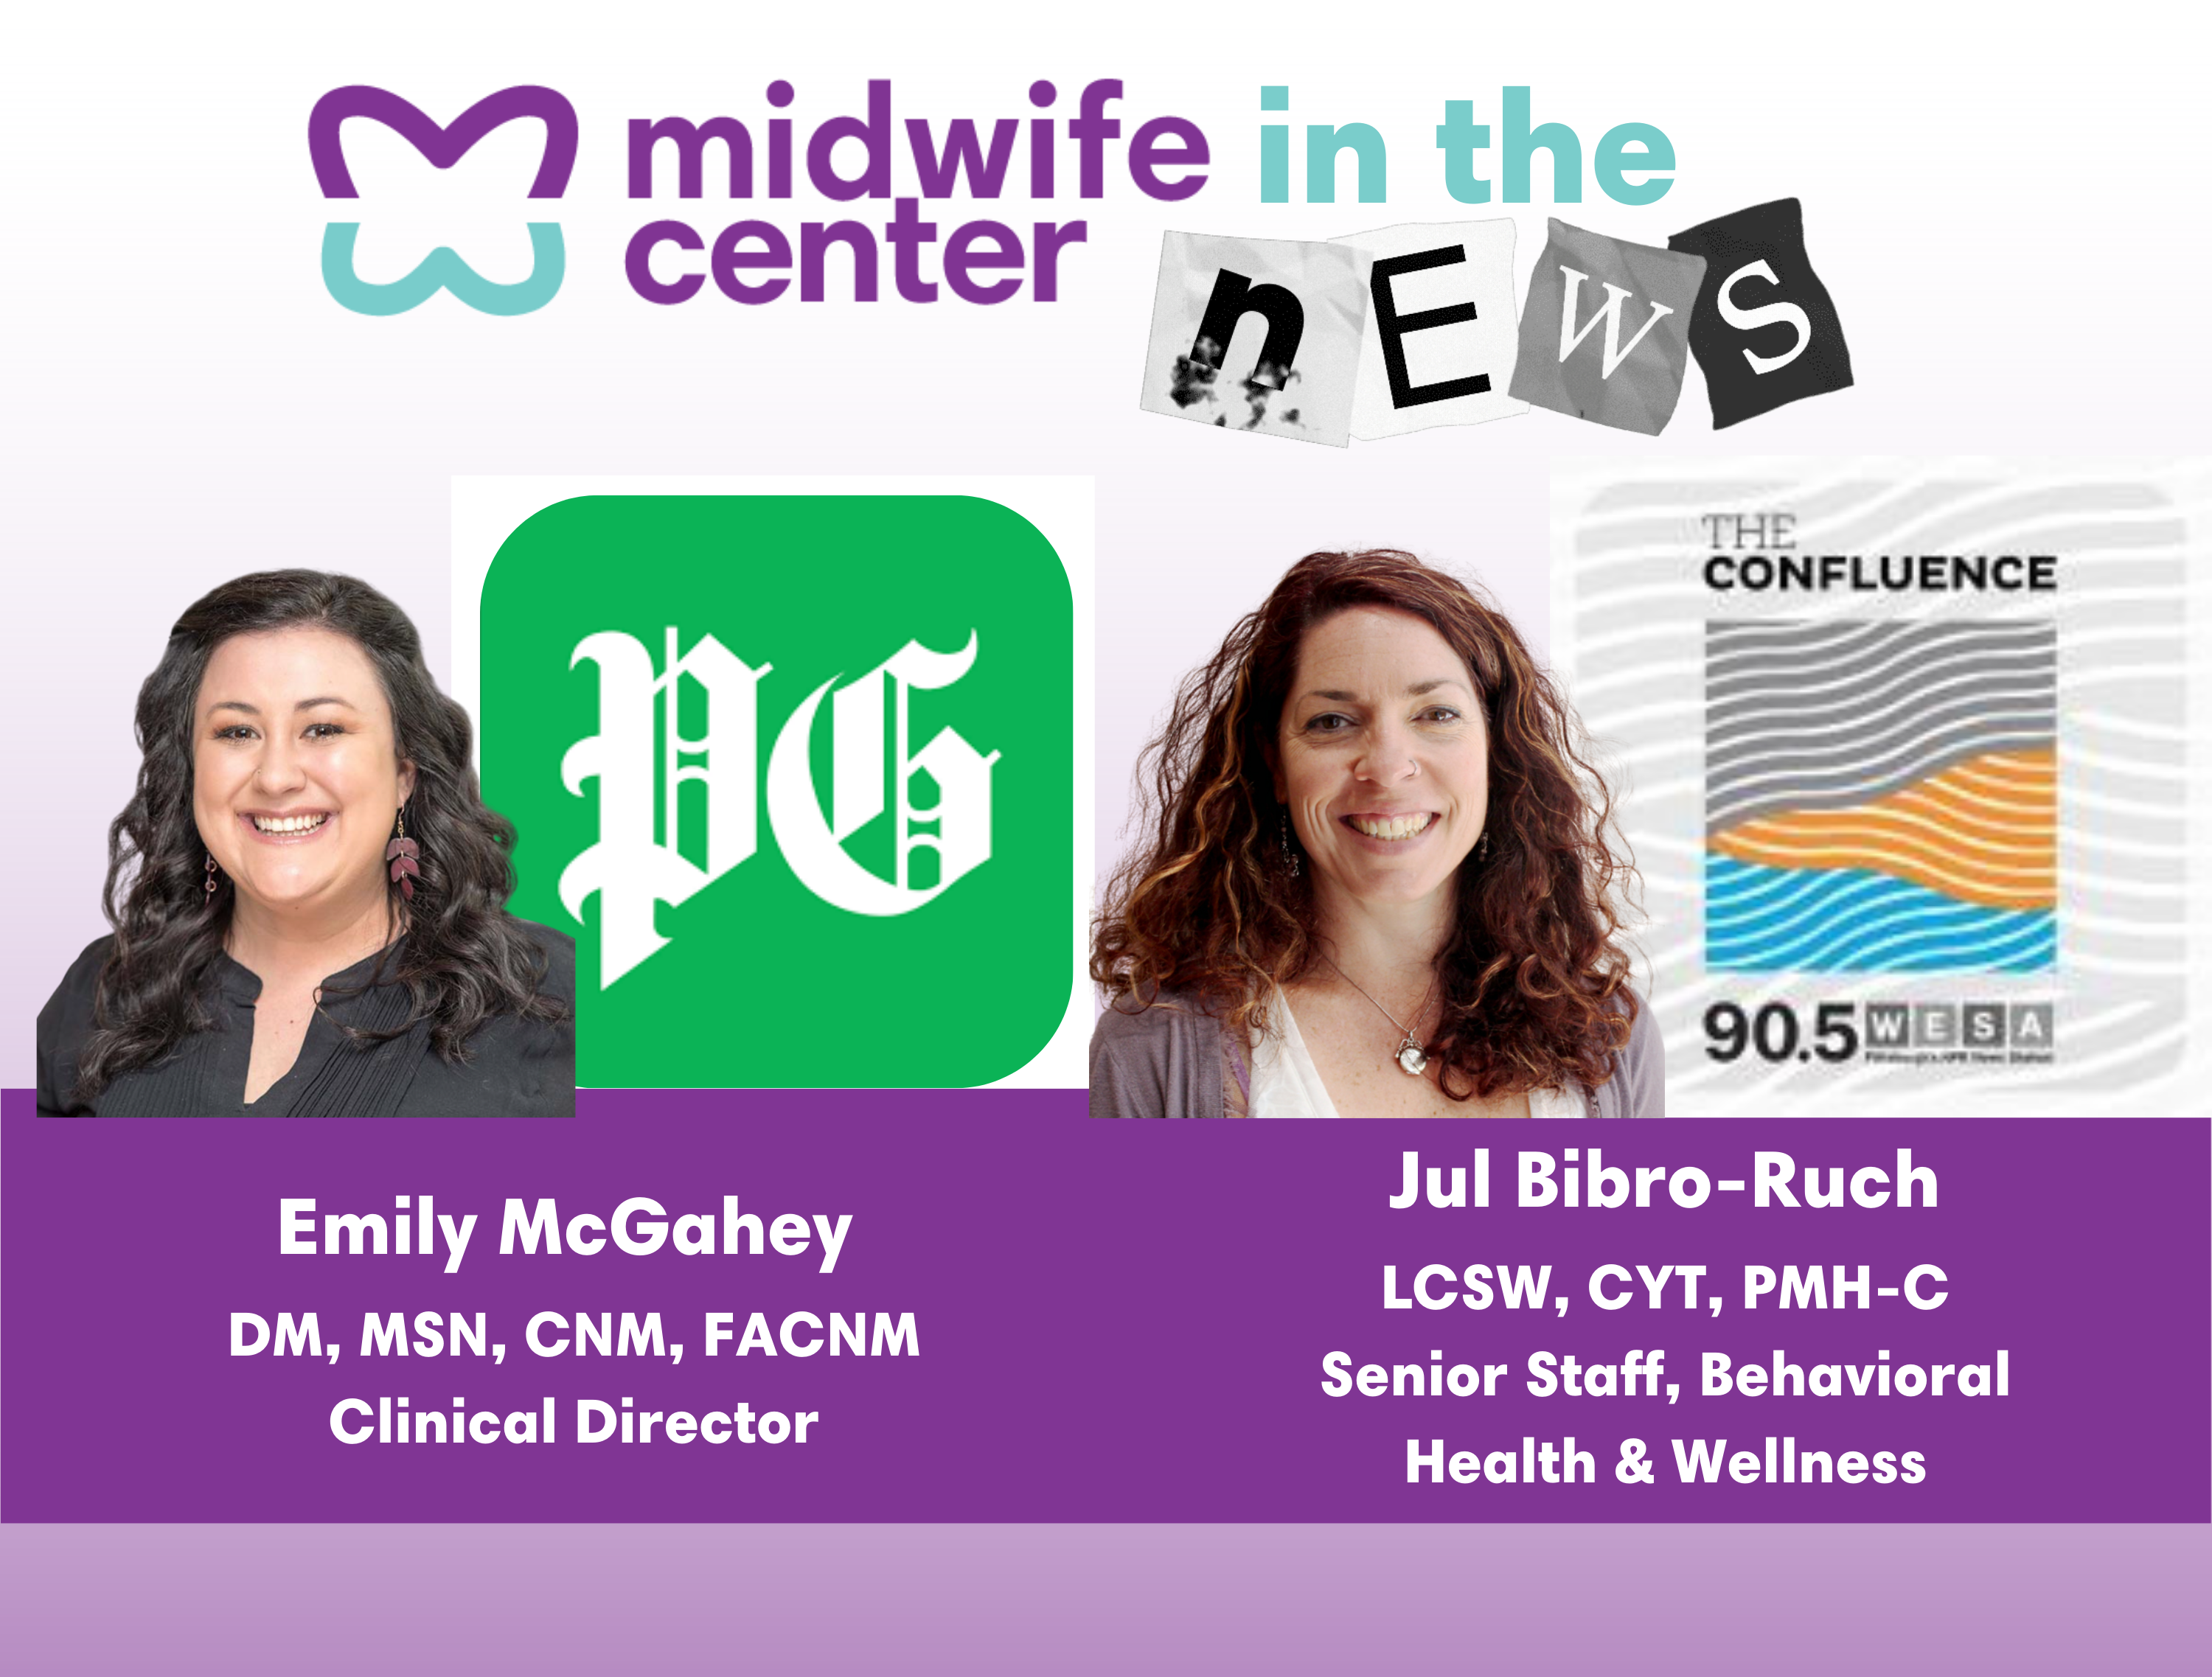 An graphic with photos of Emily McGahey alongside the Pittsburgh Post-Gazette logo and Jul Bibro-Ruch alongside The Confluence logo. The image says "Midwife Center in the News".